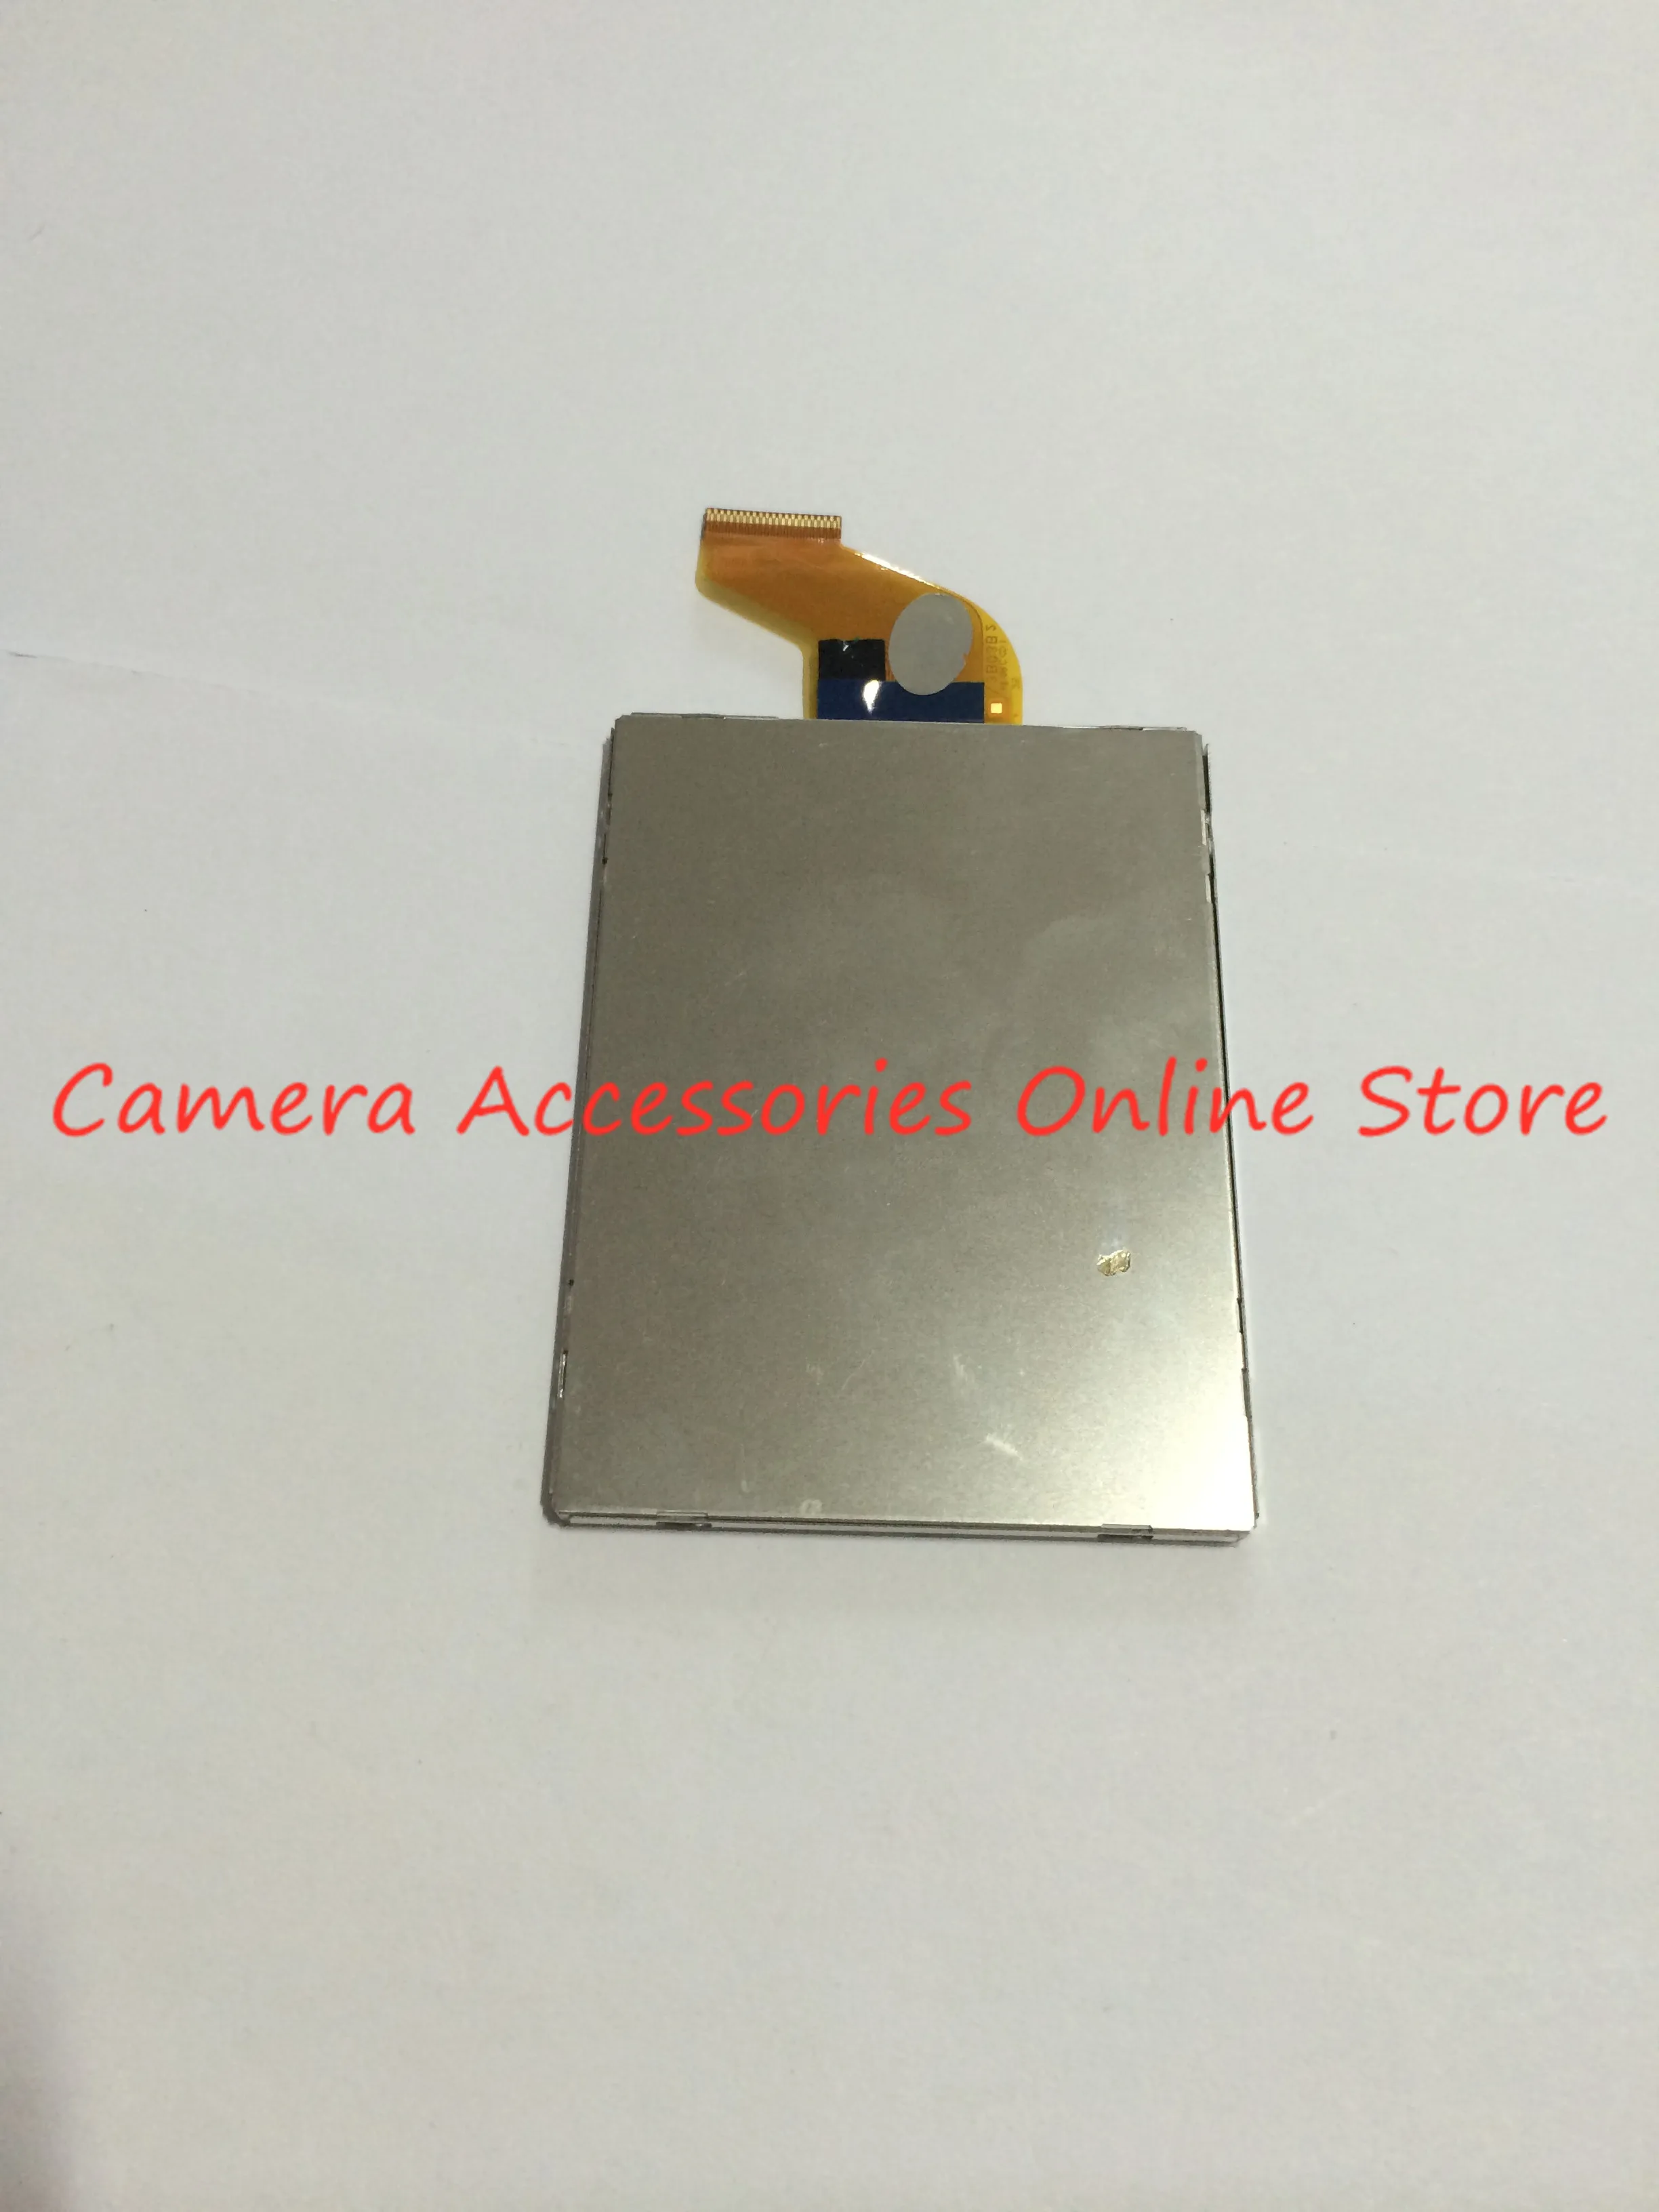 

New LCD Display Screen For Canon Powershot A4000 IS;PC1730;A4050 IS Digital Camera With backlight